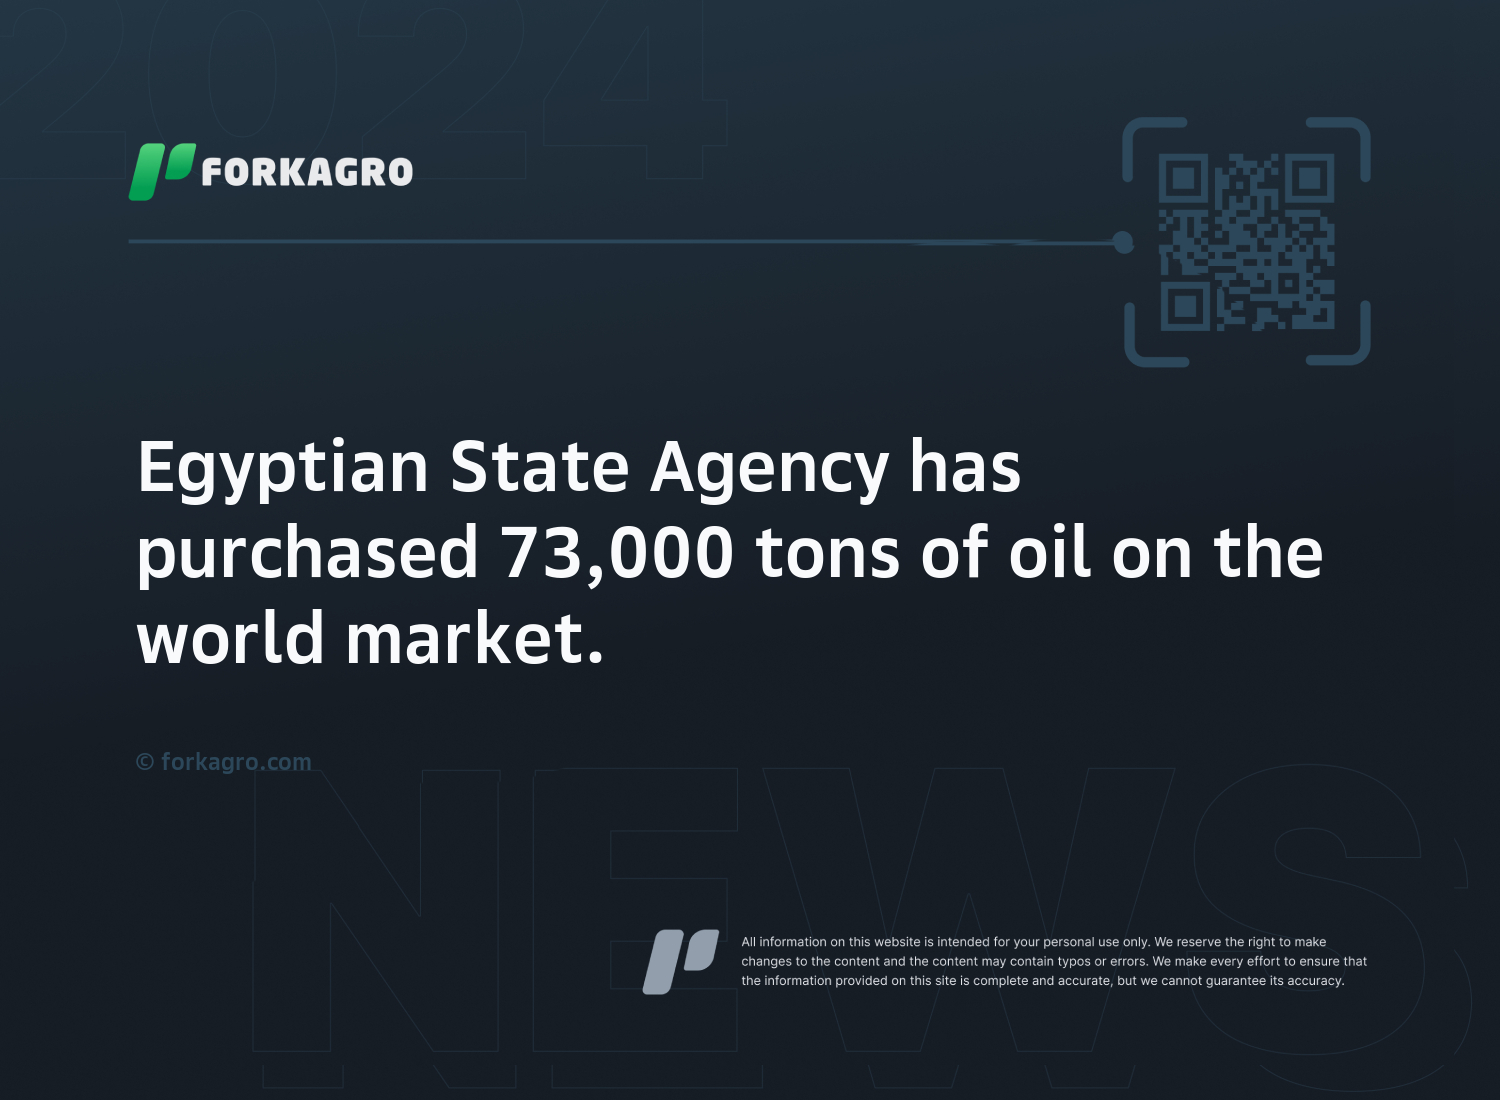 Egyptian State Agency has purchased 73,000 tons of oil on the world market.